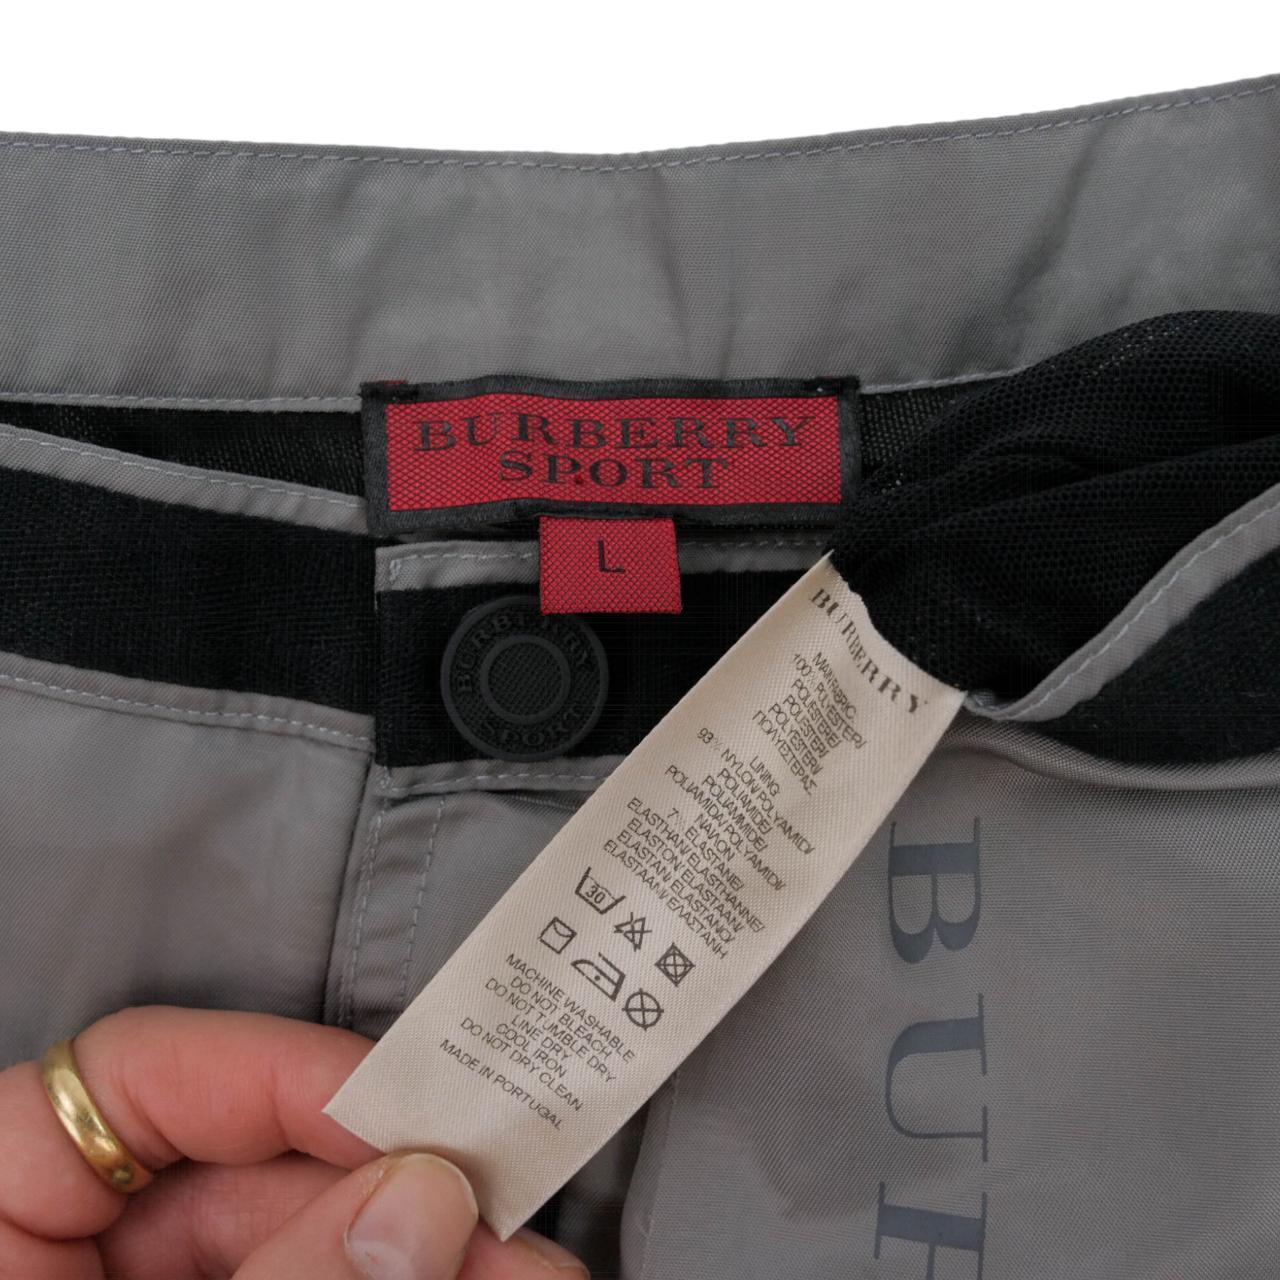 Vintage Burberry Sport Shorts Size W34 - Known Source